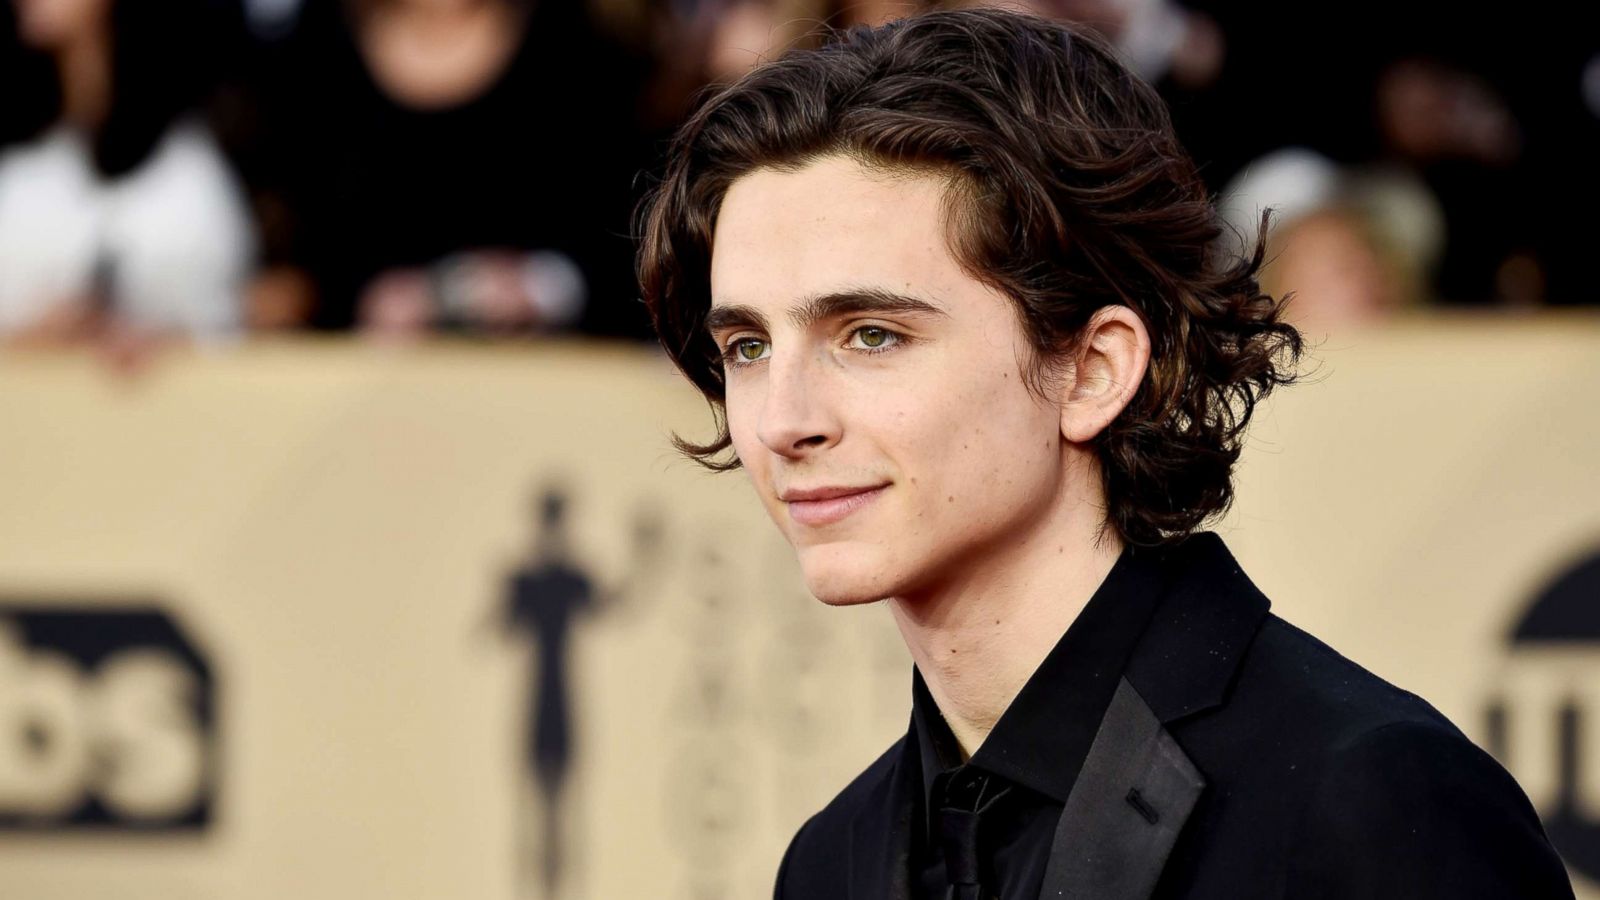 Oscar Nominee Timothee Chalamet On Call Me By Your Name And The Time He Embarrassed Himself With Lady Bird Co Star Saoirse Ronan Abc News